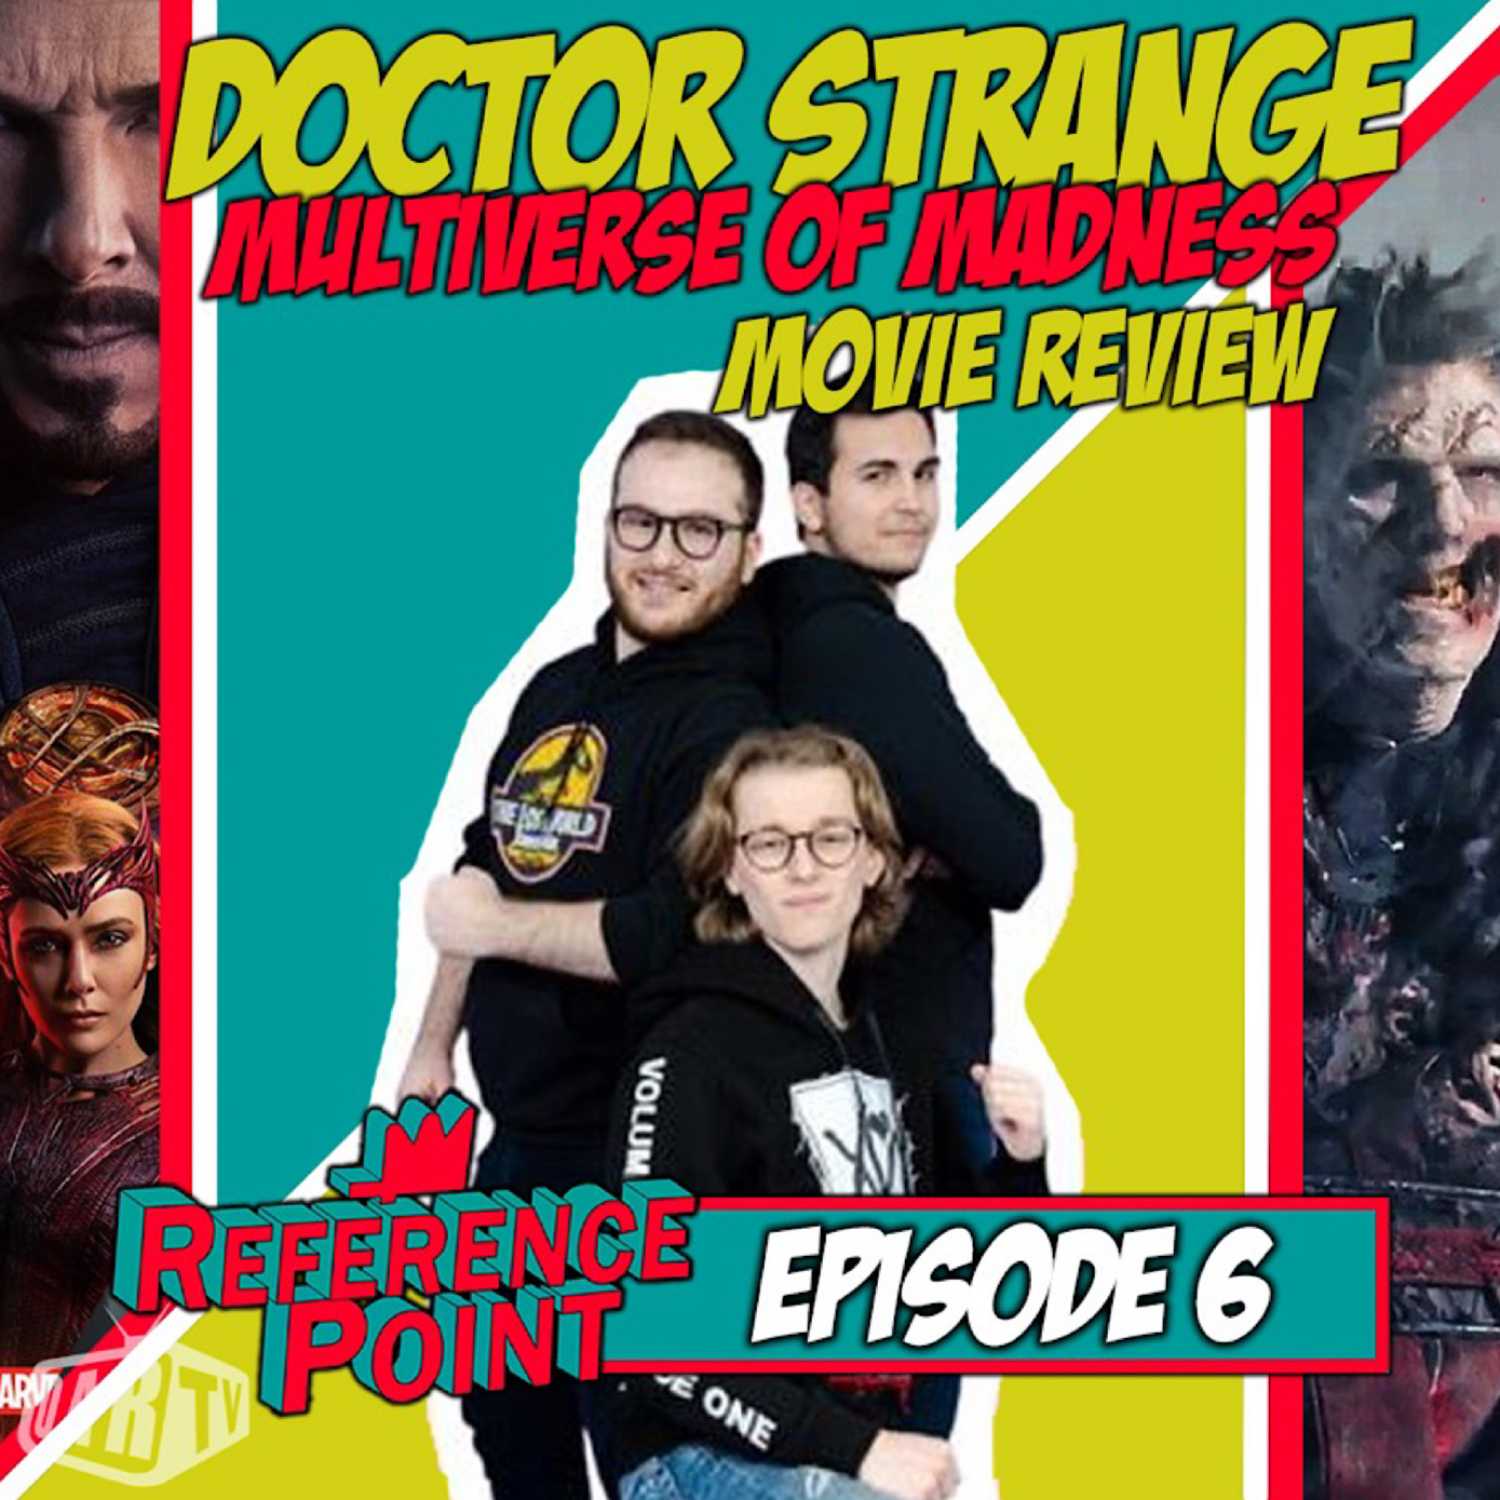 REFERENCE POINT - Episode 6 - DOCTOR STRANGE IN THE MULTIVERSE OF MADNESS (Movie Review)